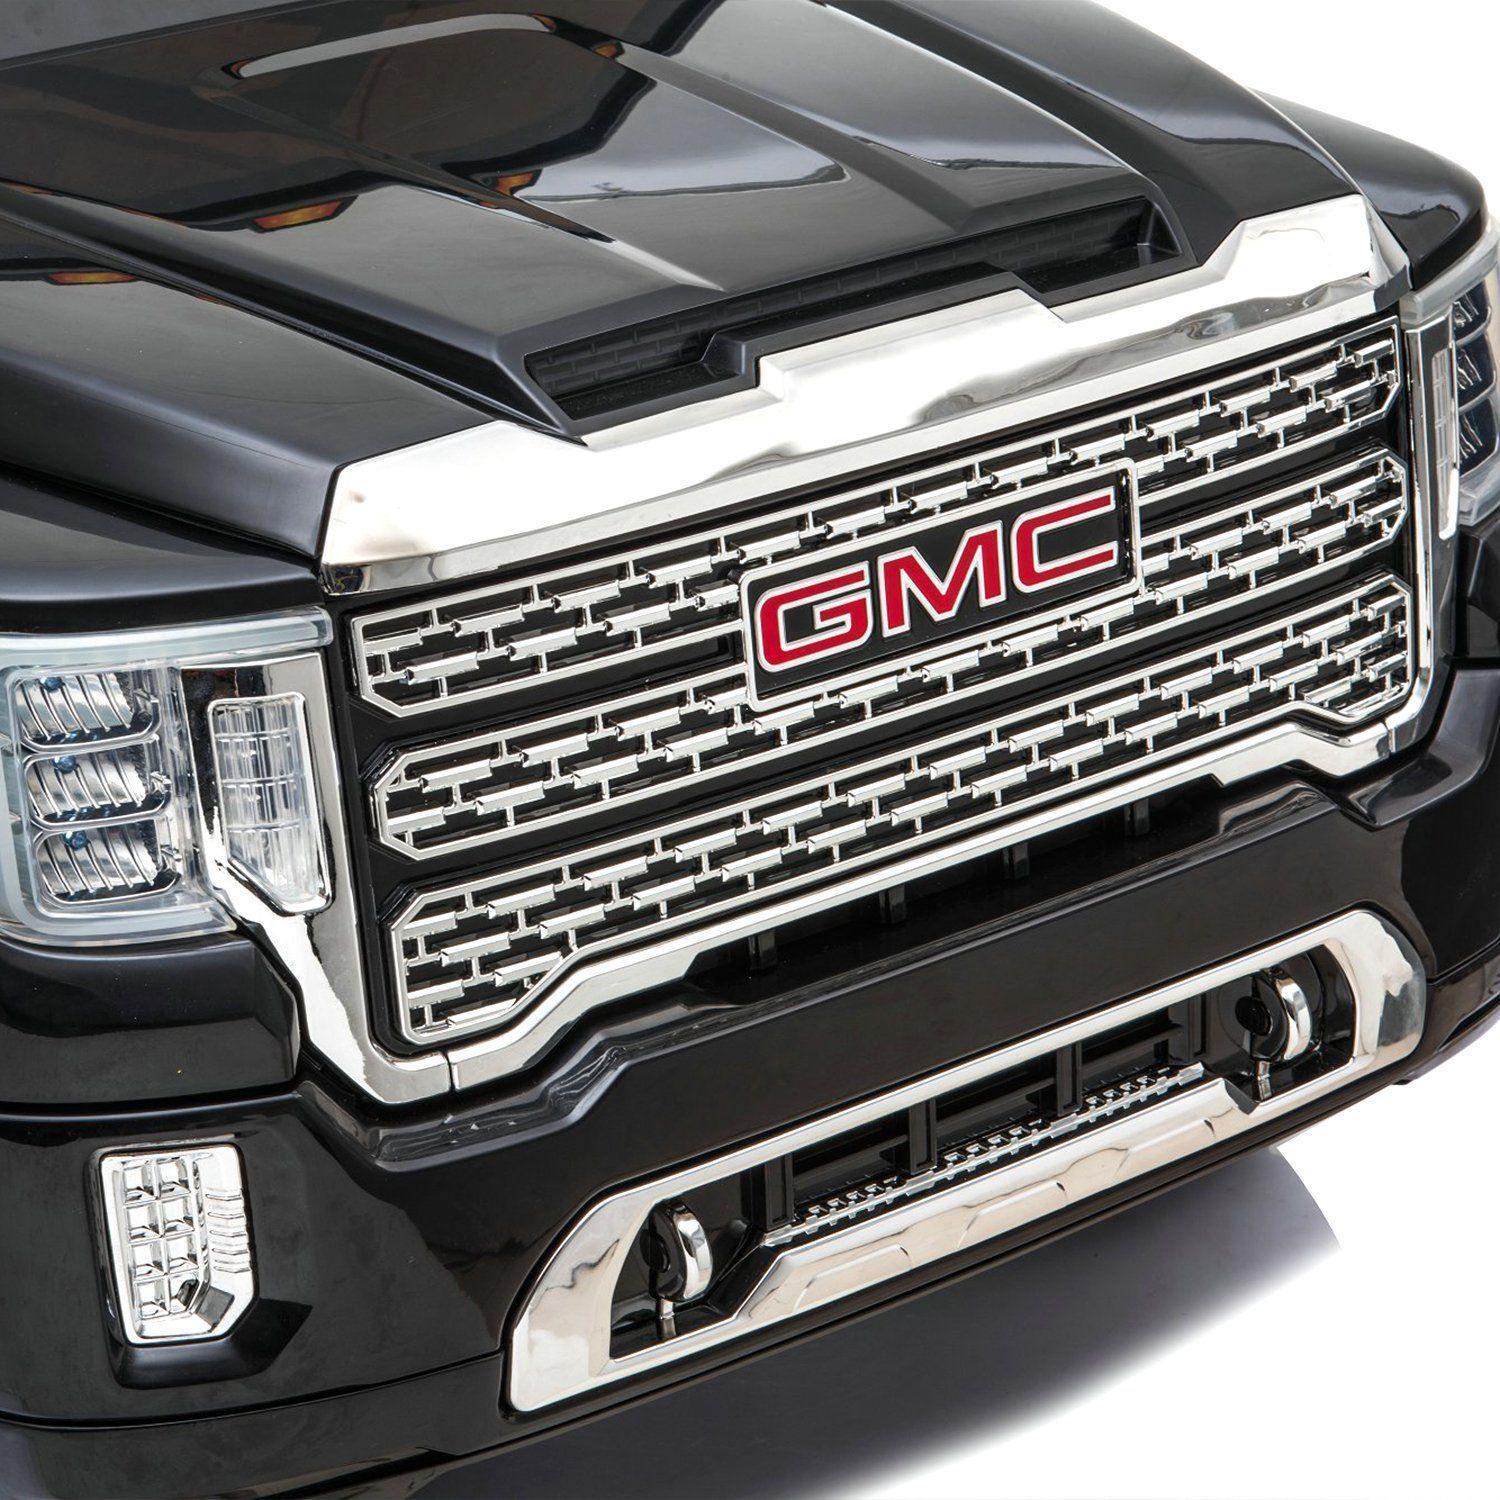 24V GMC Denali 2 Seater Battery Operated Ride on Car with Parental Remote Control - DTI Direct USA